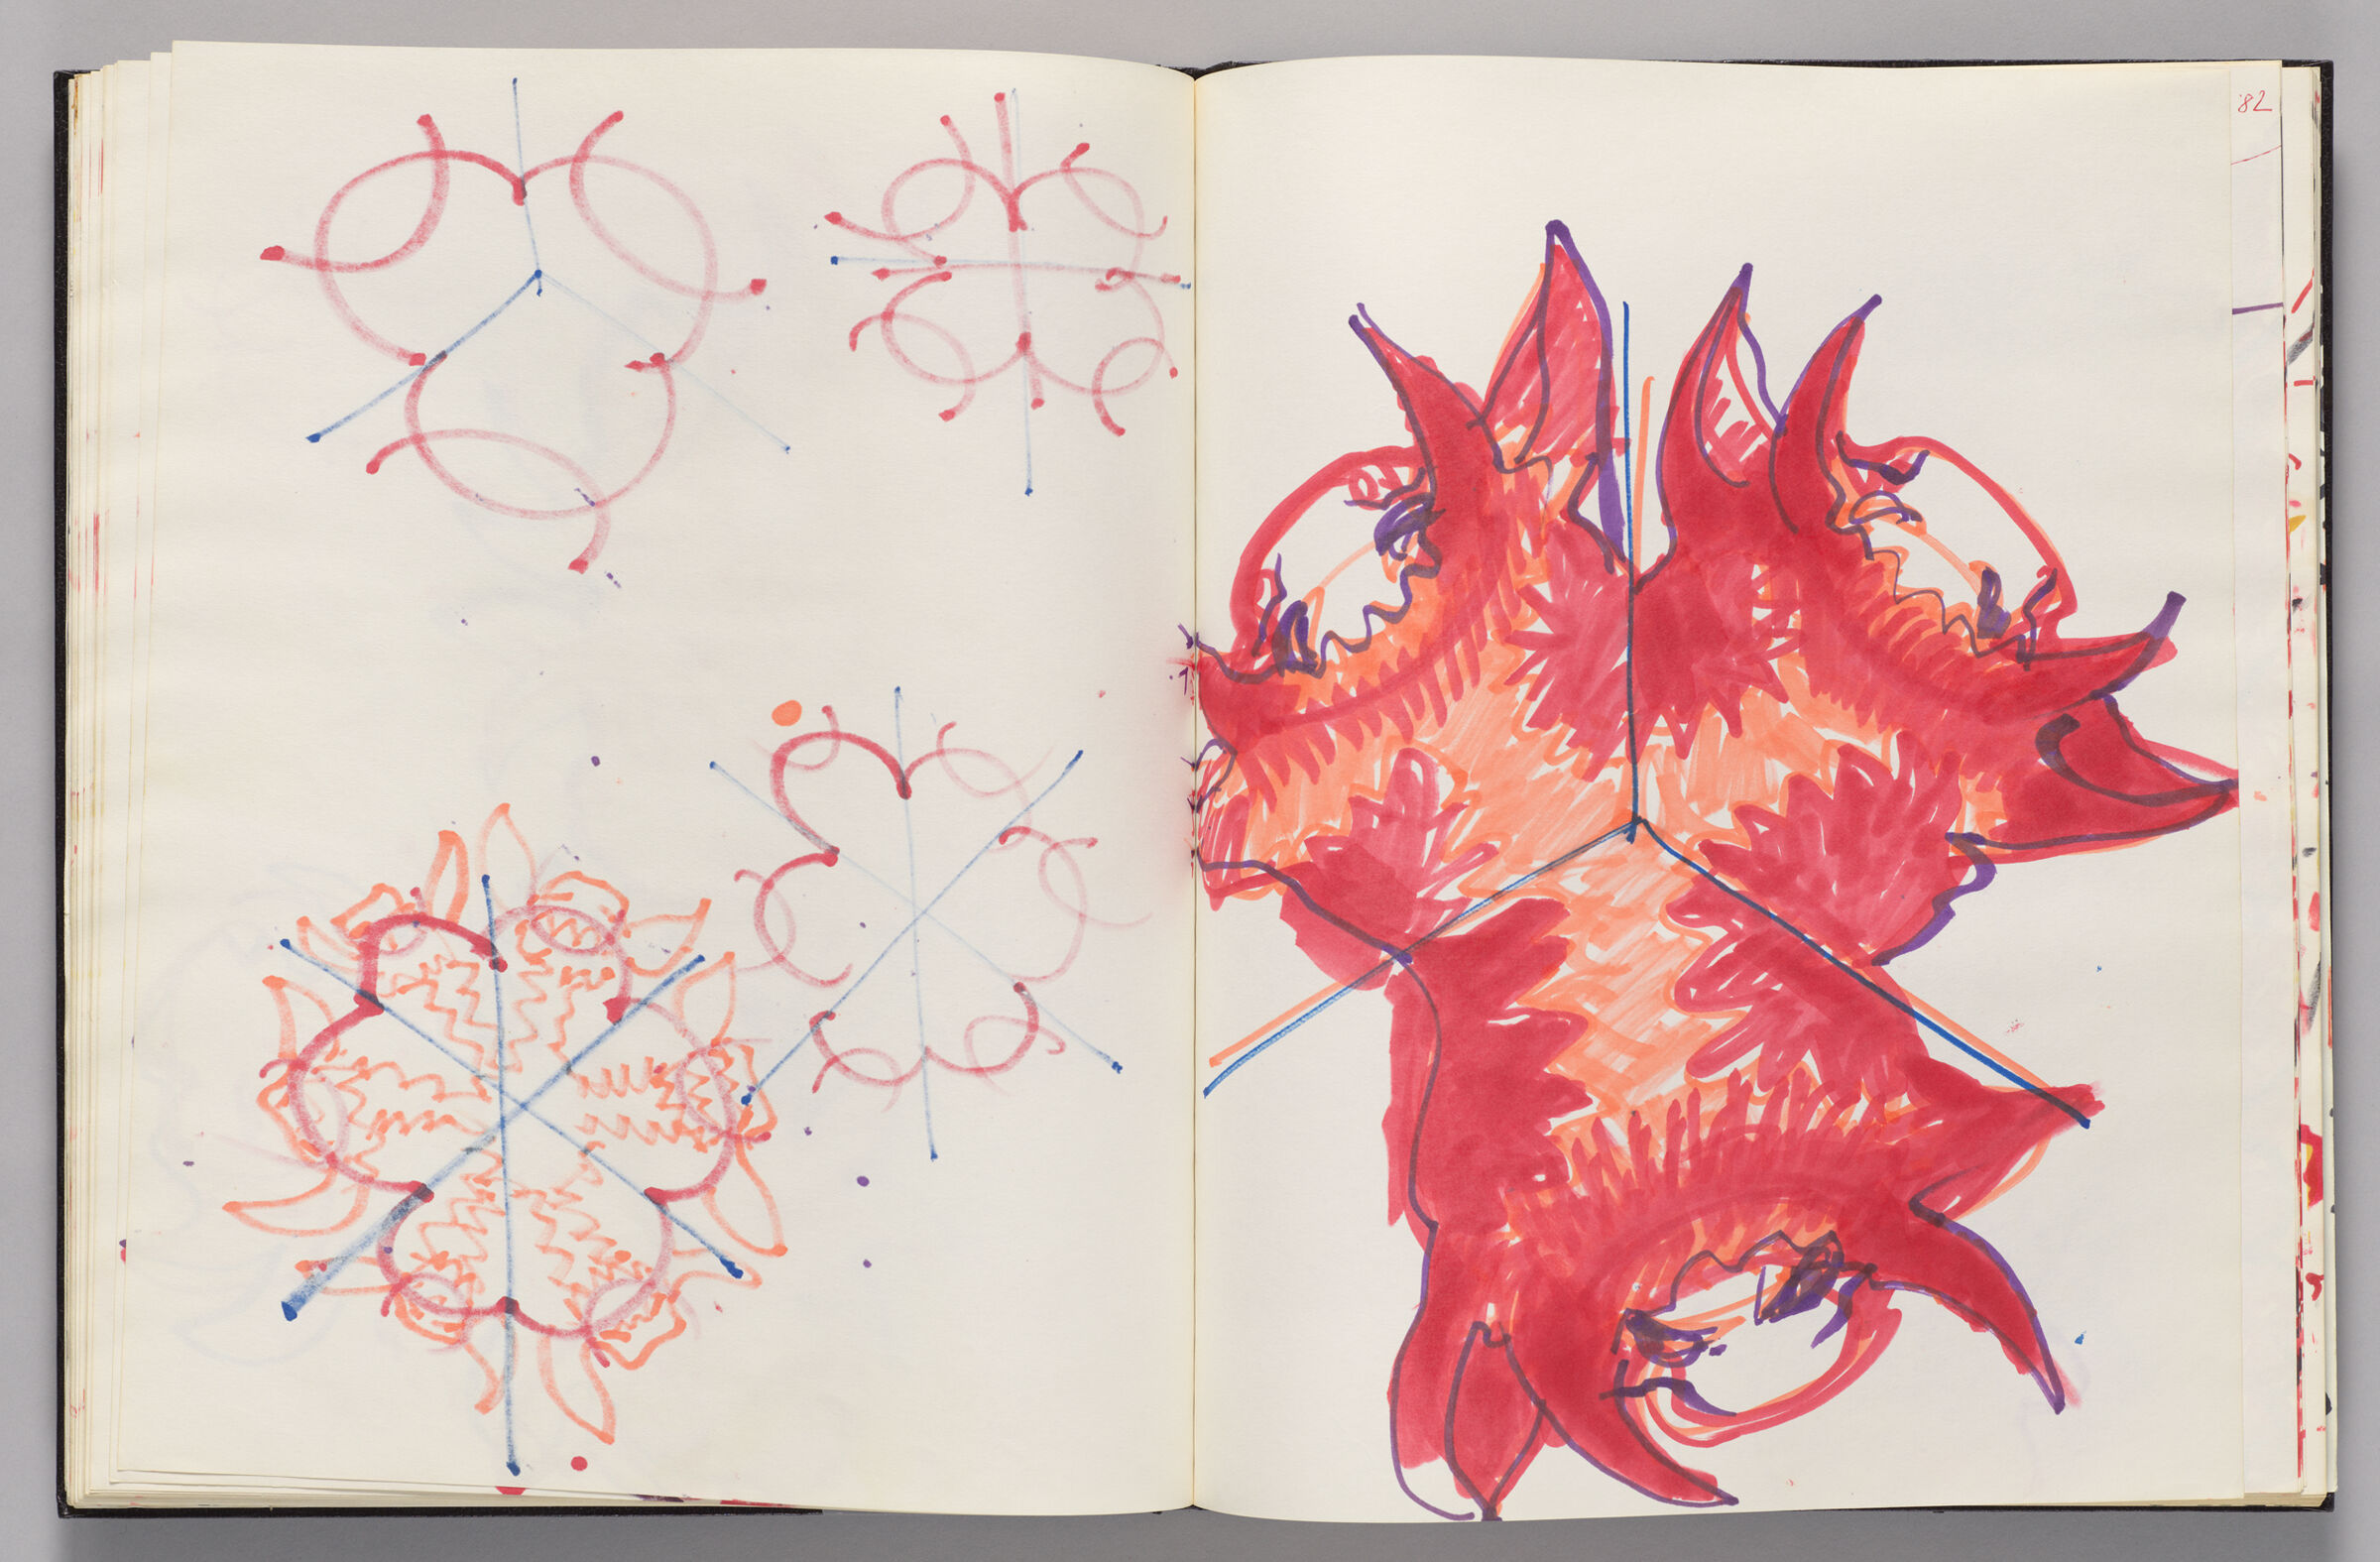 Untitled (Bleed-Through Of Previous Page, Left Page); Untitled (Three Minotaur Heads, Aerial View, Right Page)